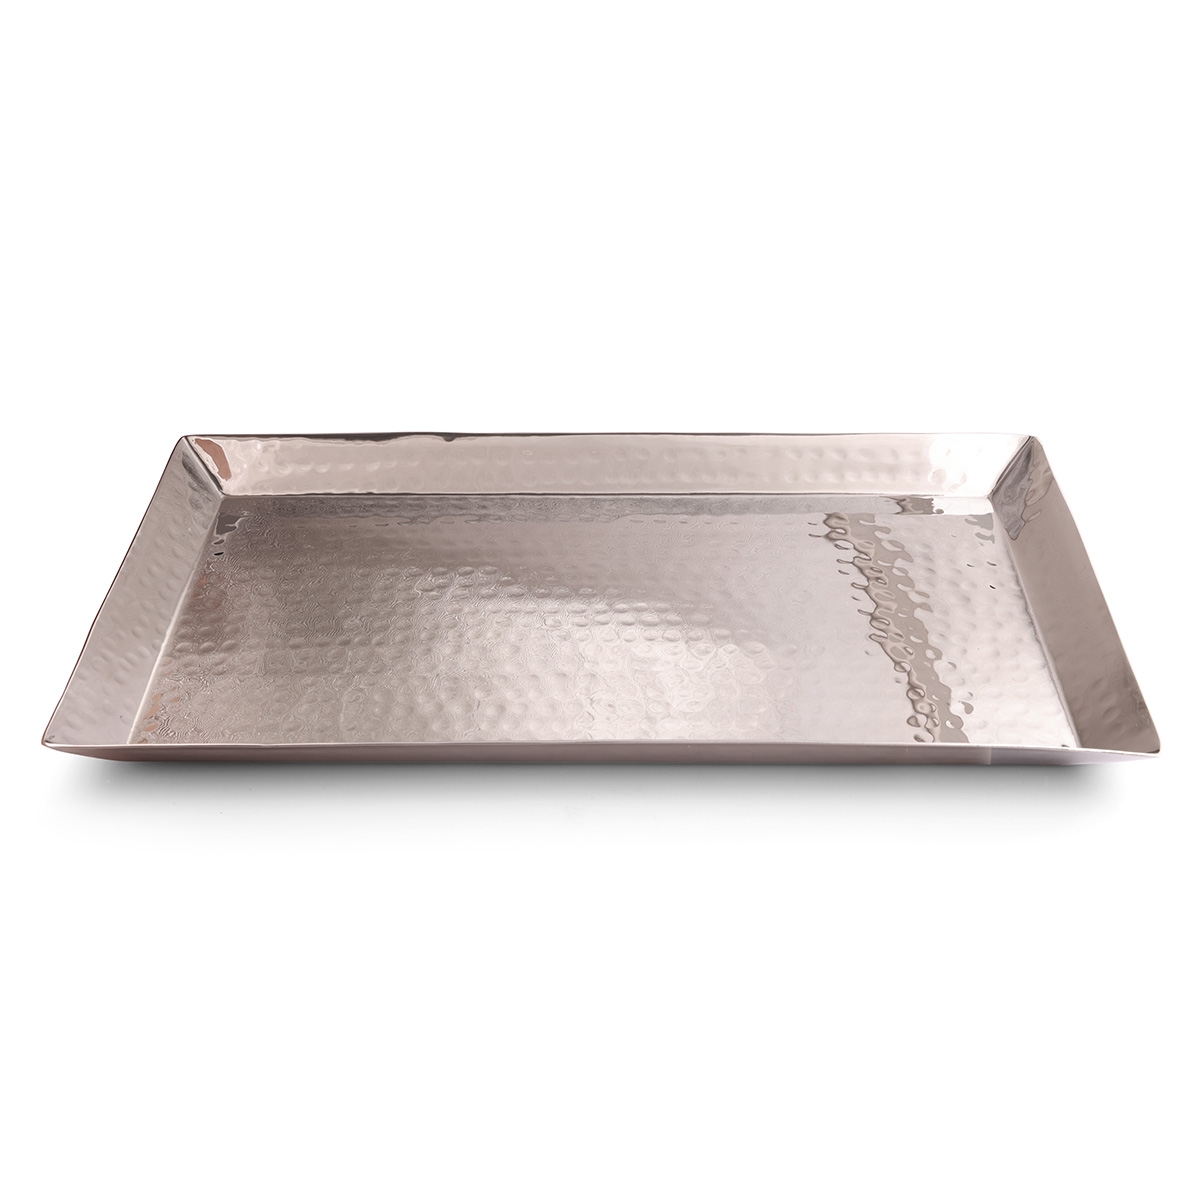 Yair Emanuel Stainless Steel Hammered Tray - 1